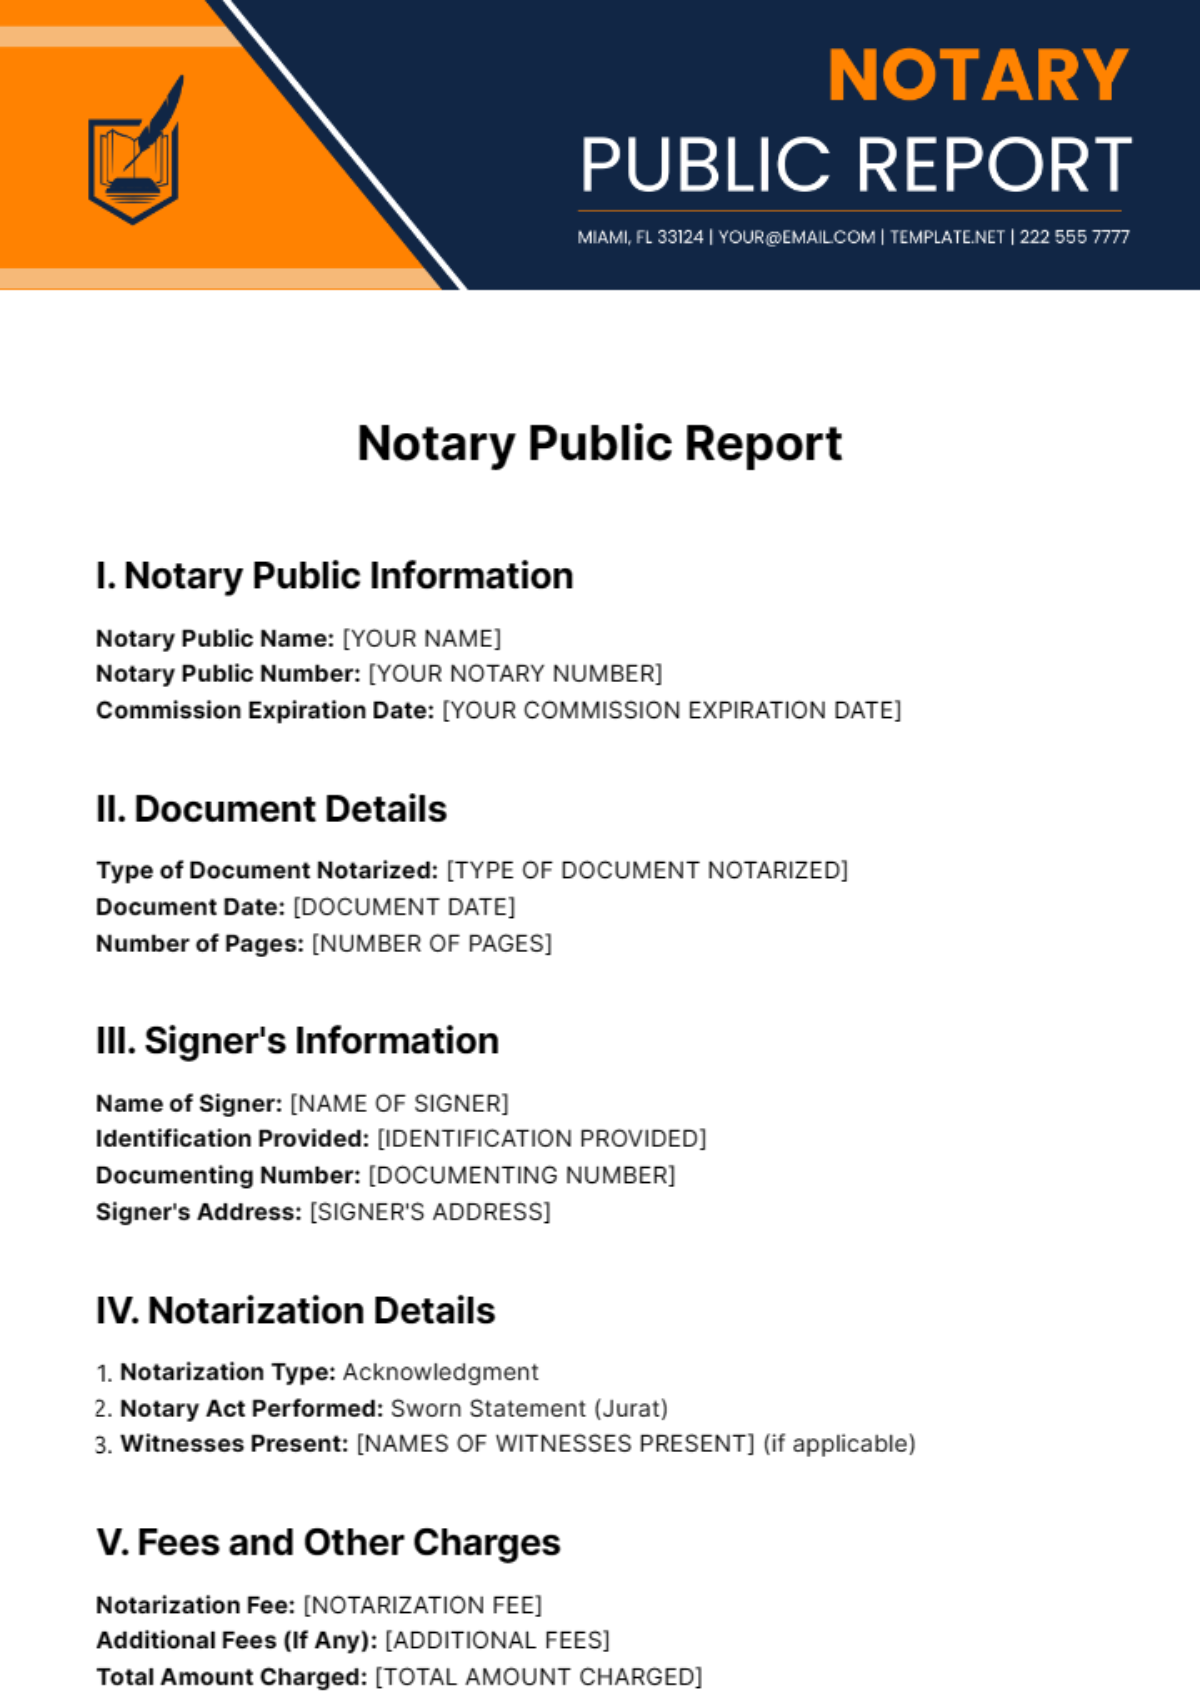 Notary Public Report Template